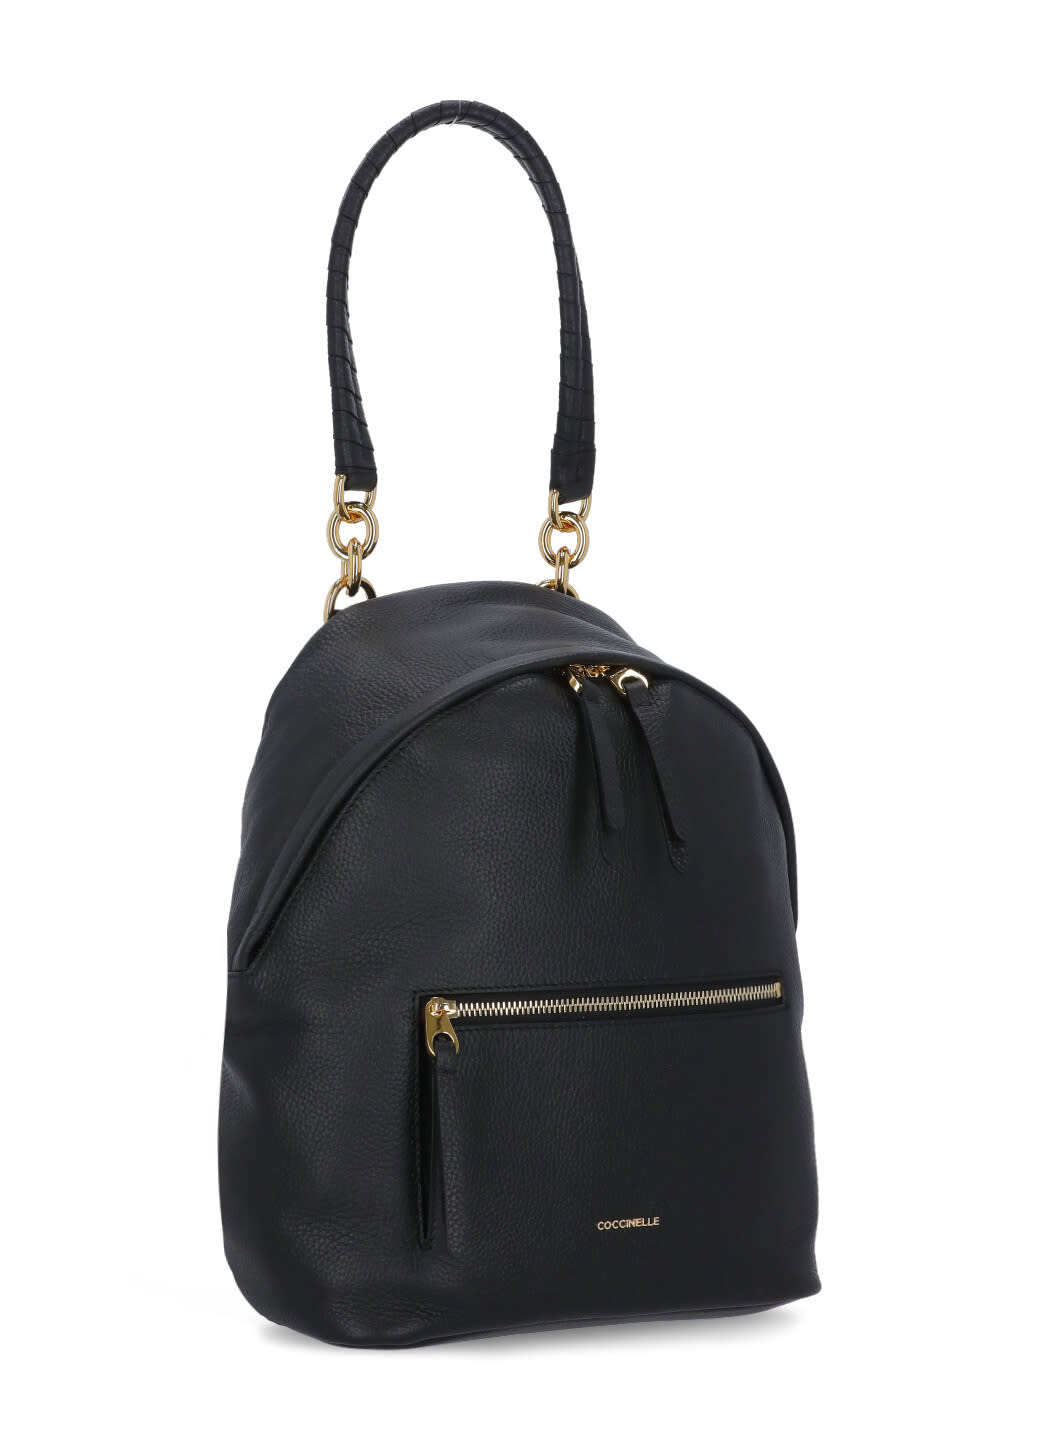 Coccinelle Maelody Backpack In Black | ModeSens